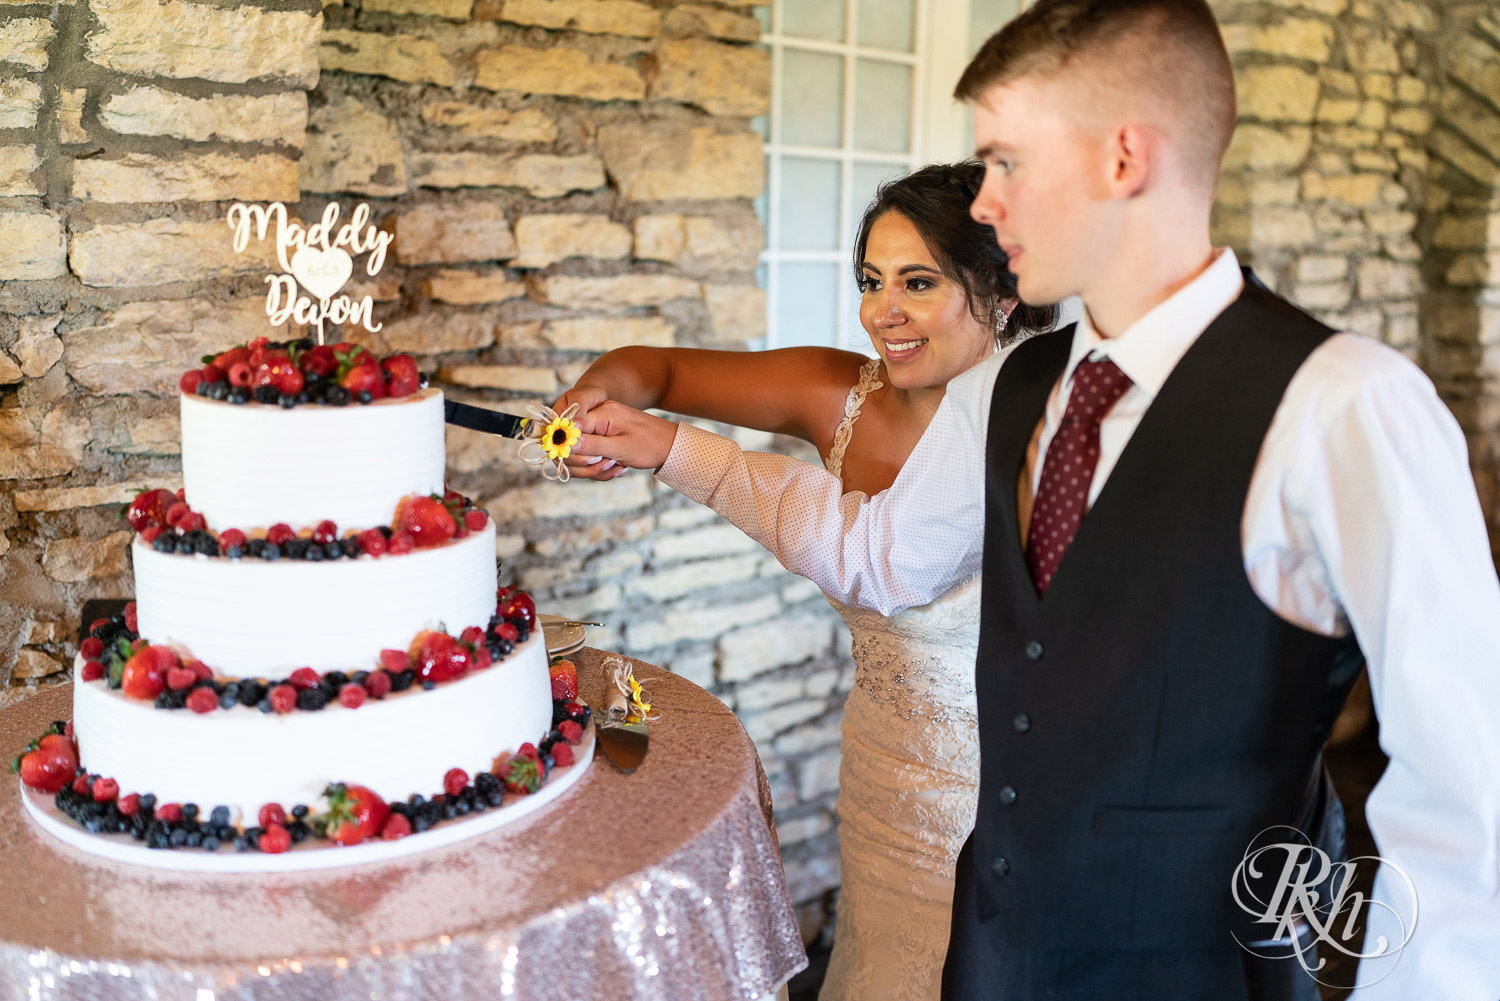 Bride and groom cutting cake at wedding reception at Mayowood Stone Barn in Rochester, Minnesota.